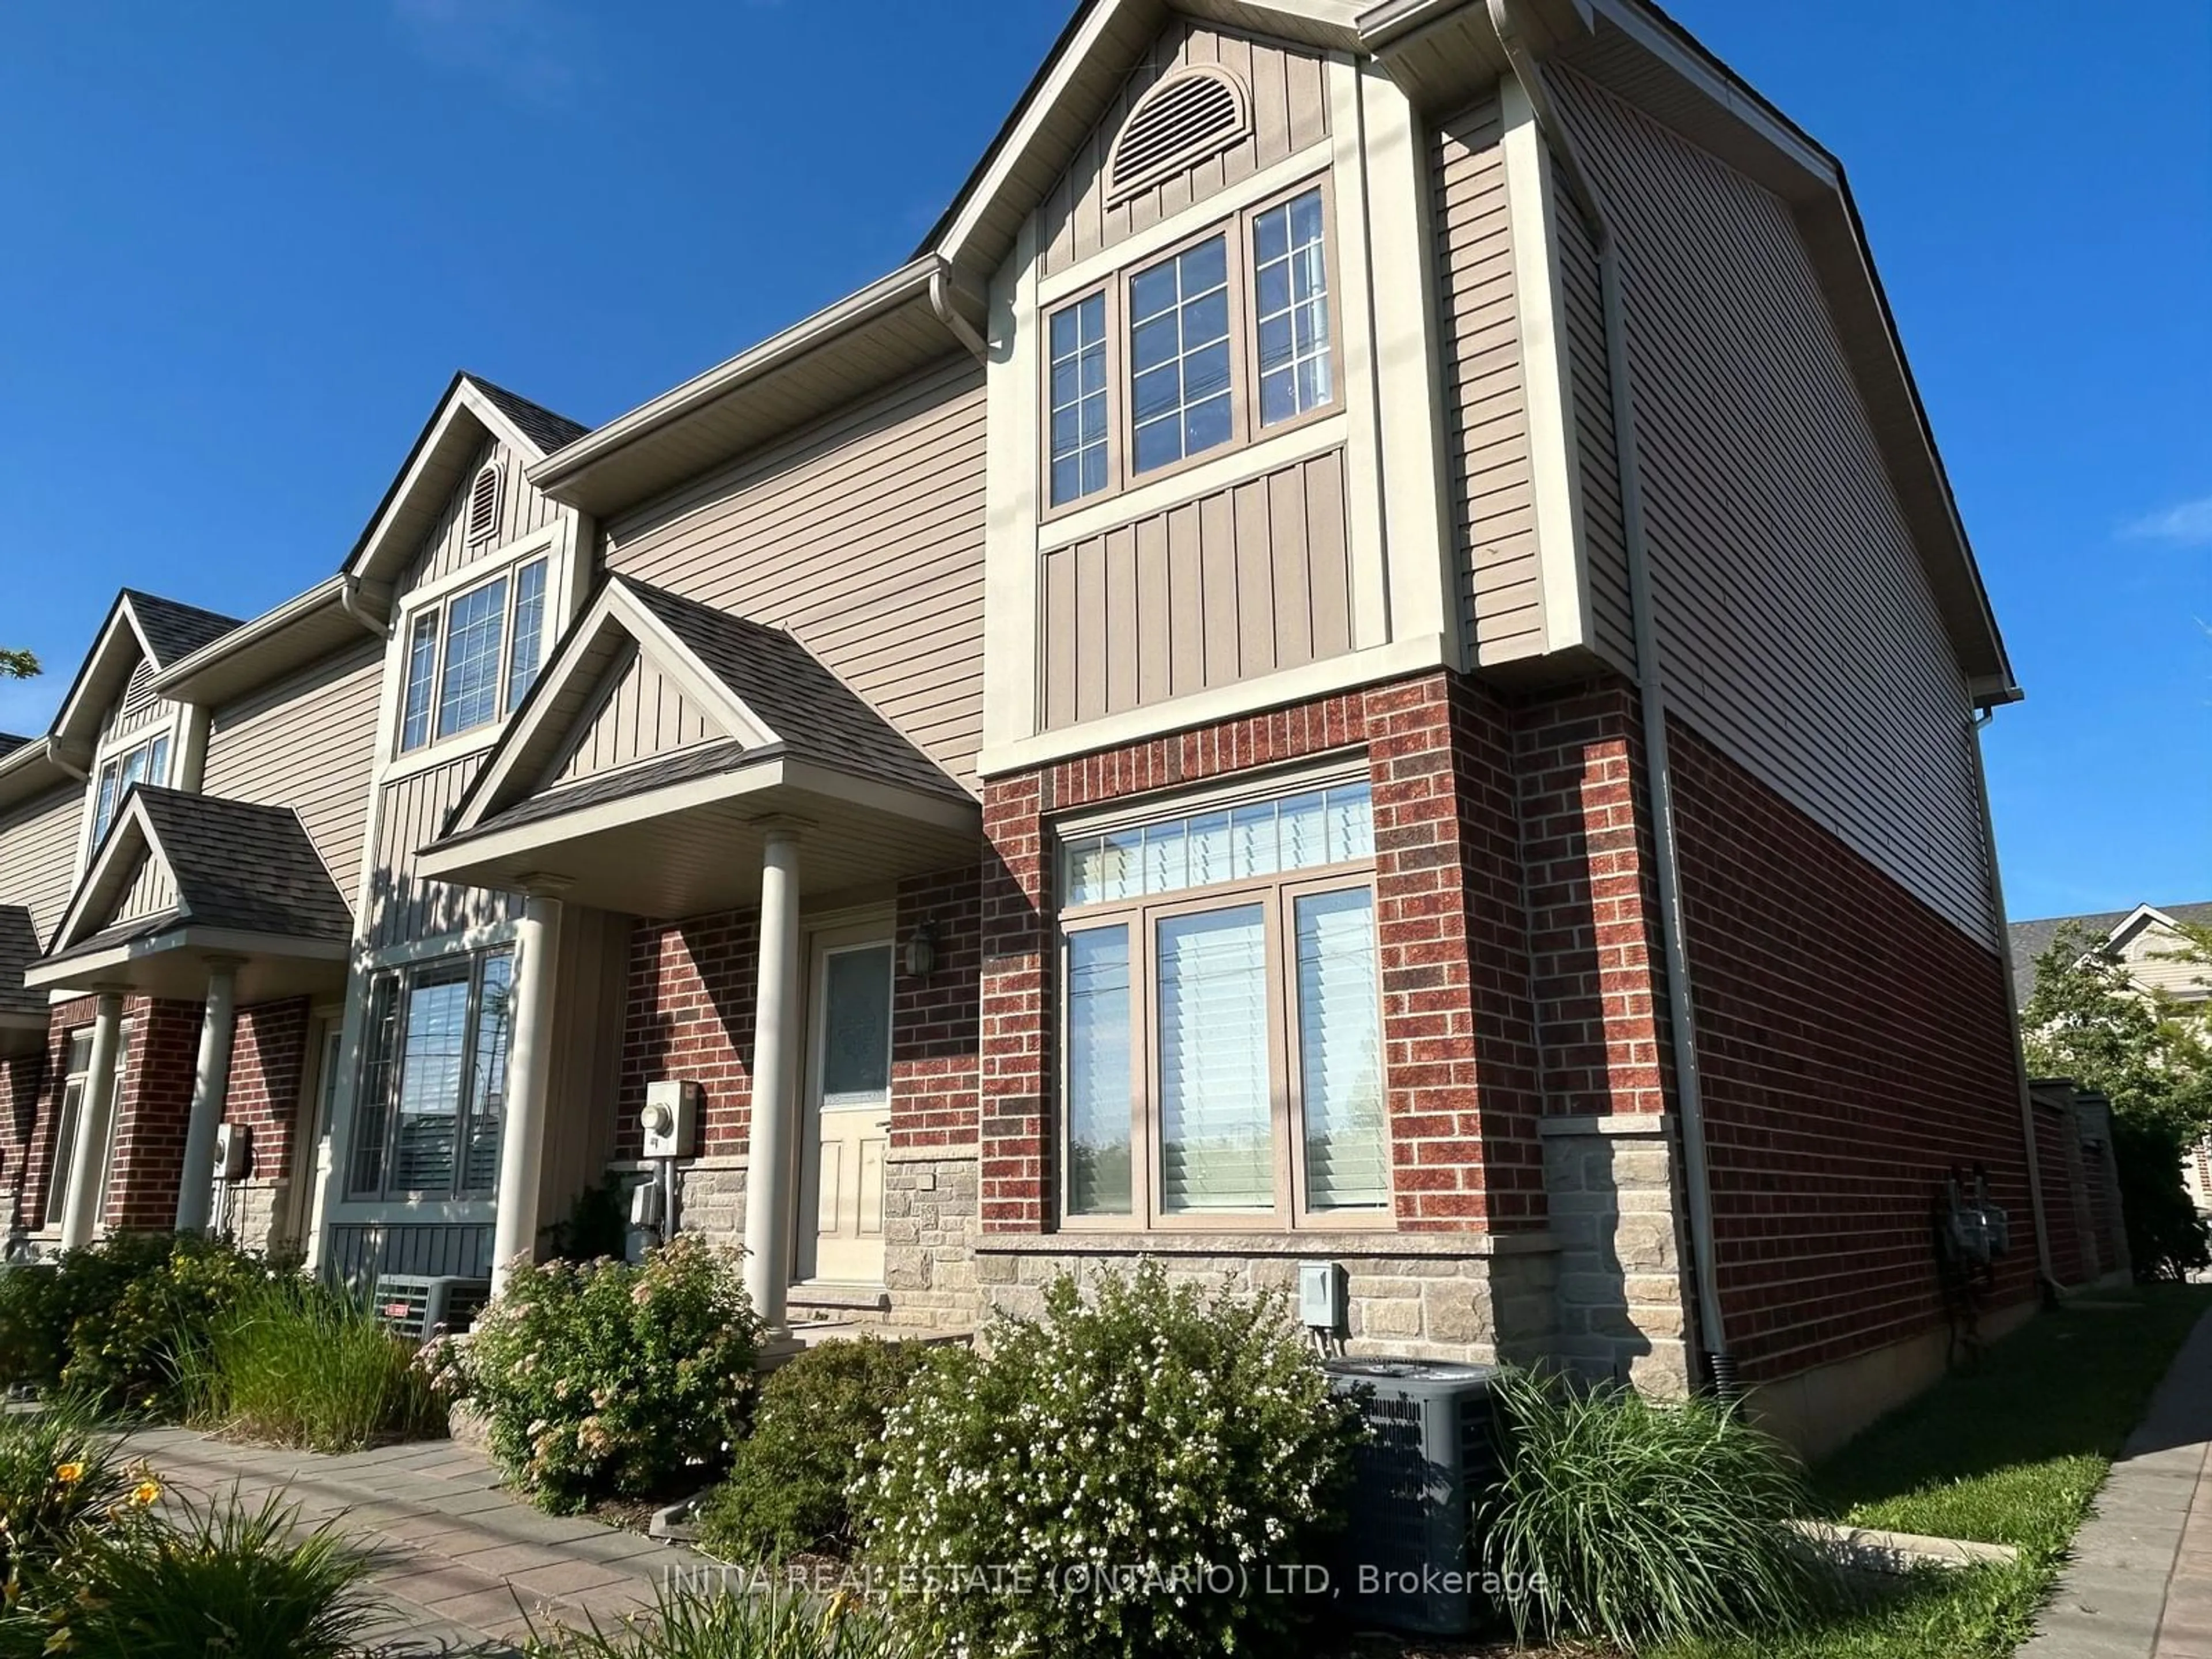 Home with brick exterior material for 2145 North Routledge Park #61, London Ontario N6G 0J8